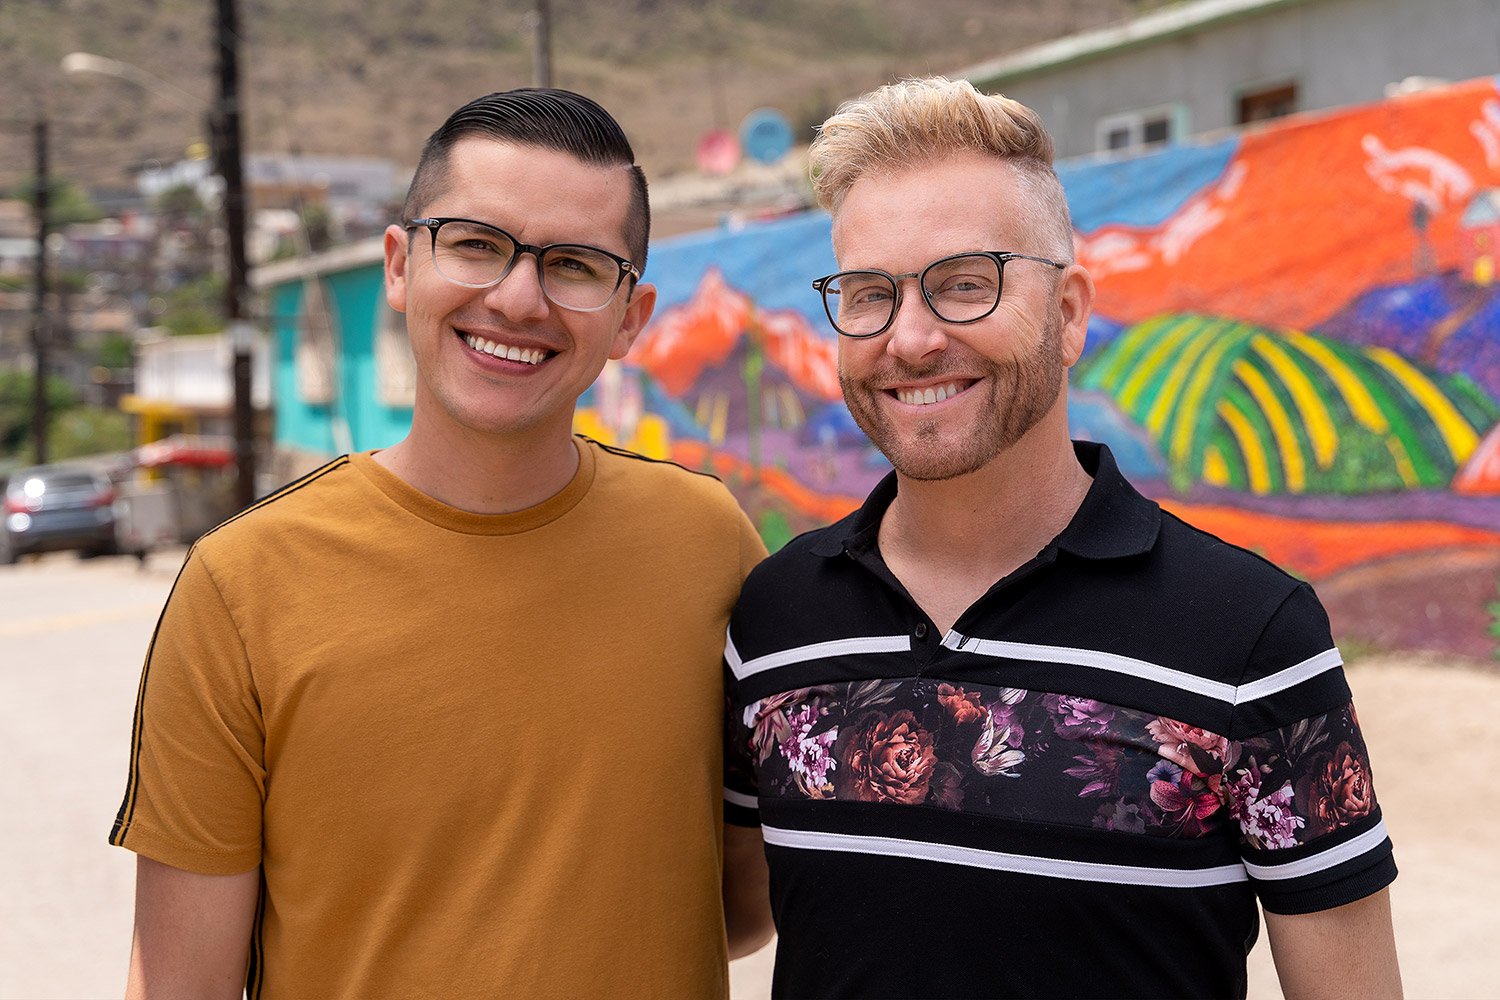 Kenneth 'Kenny' Niedermeier and Armando Rubio standing together in front of a colorful mural for promo for '90 Day Fiancé: The Other Way' Season 3.